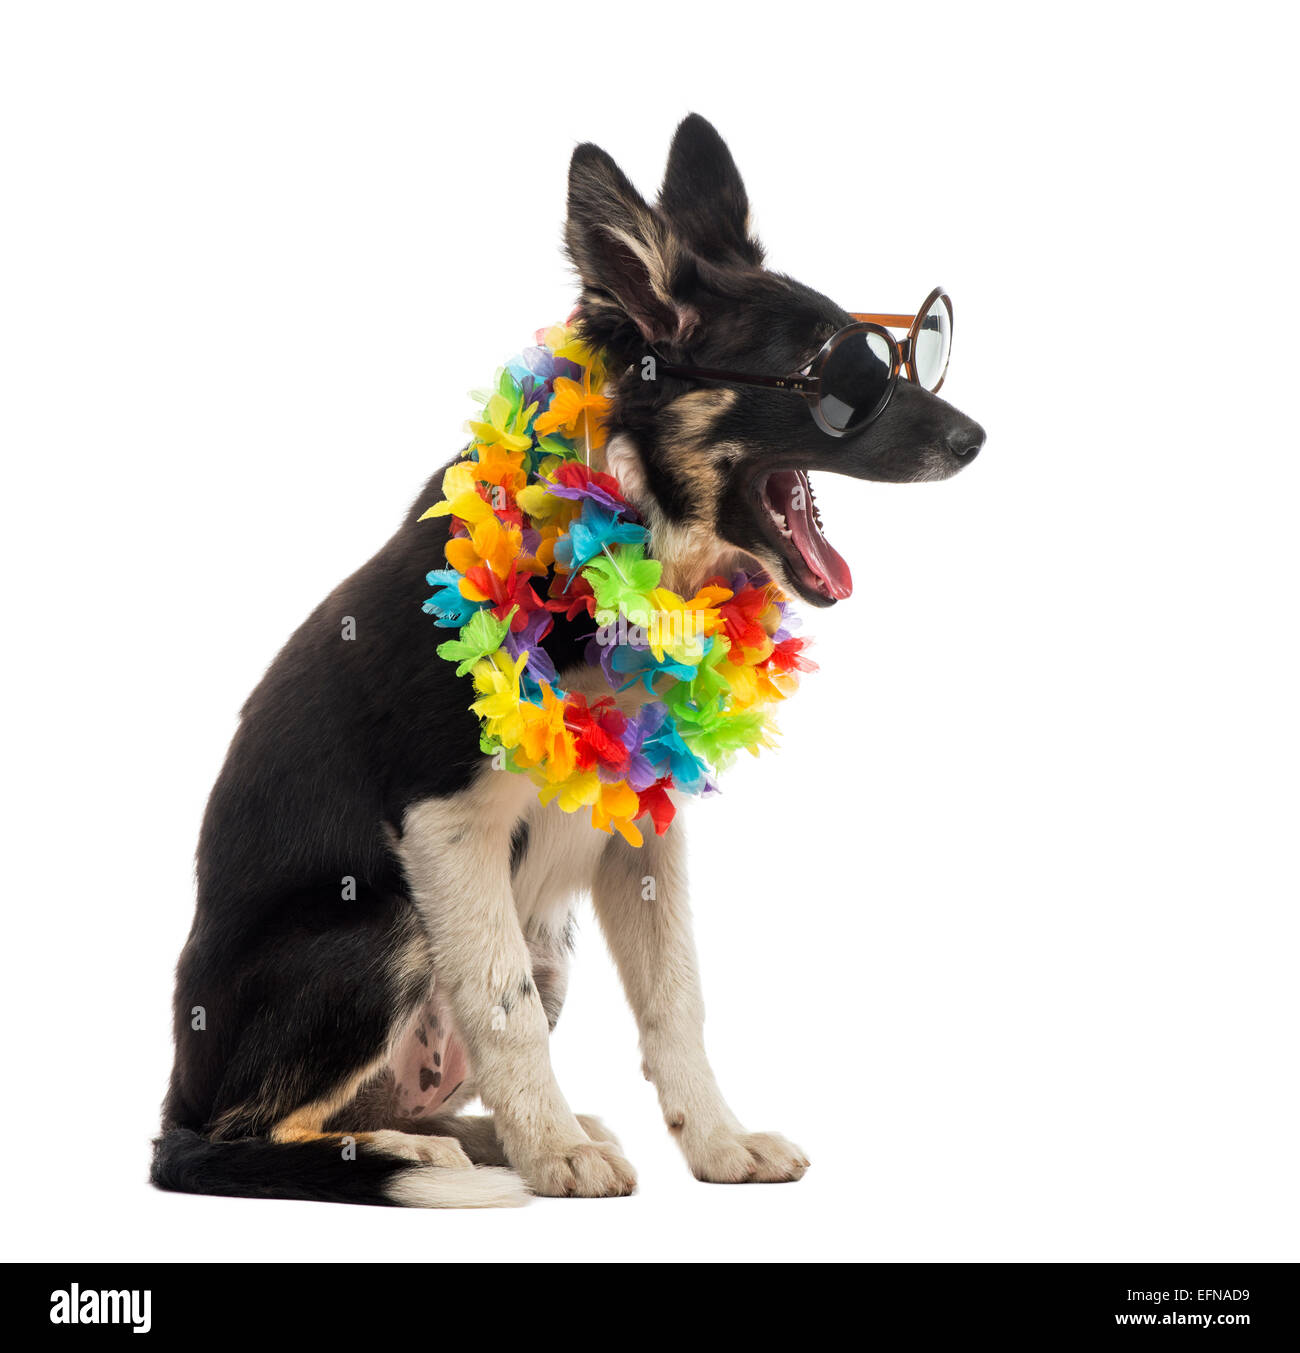 Border collie sitting and wearing sunglasses and a Hawaiian lei against white background Stock Photo